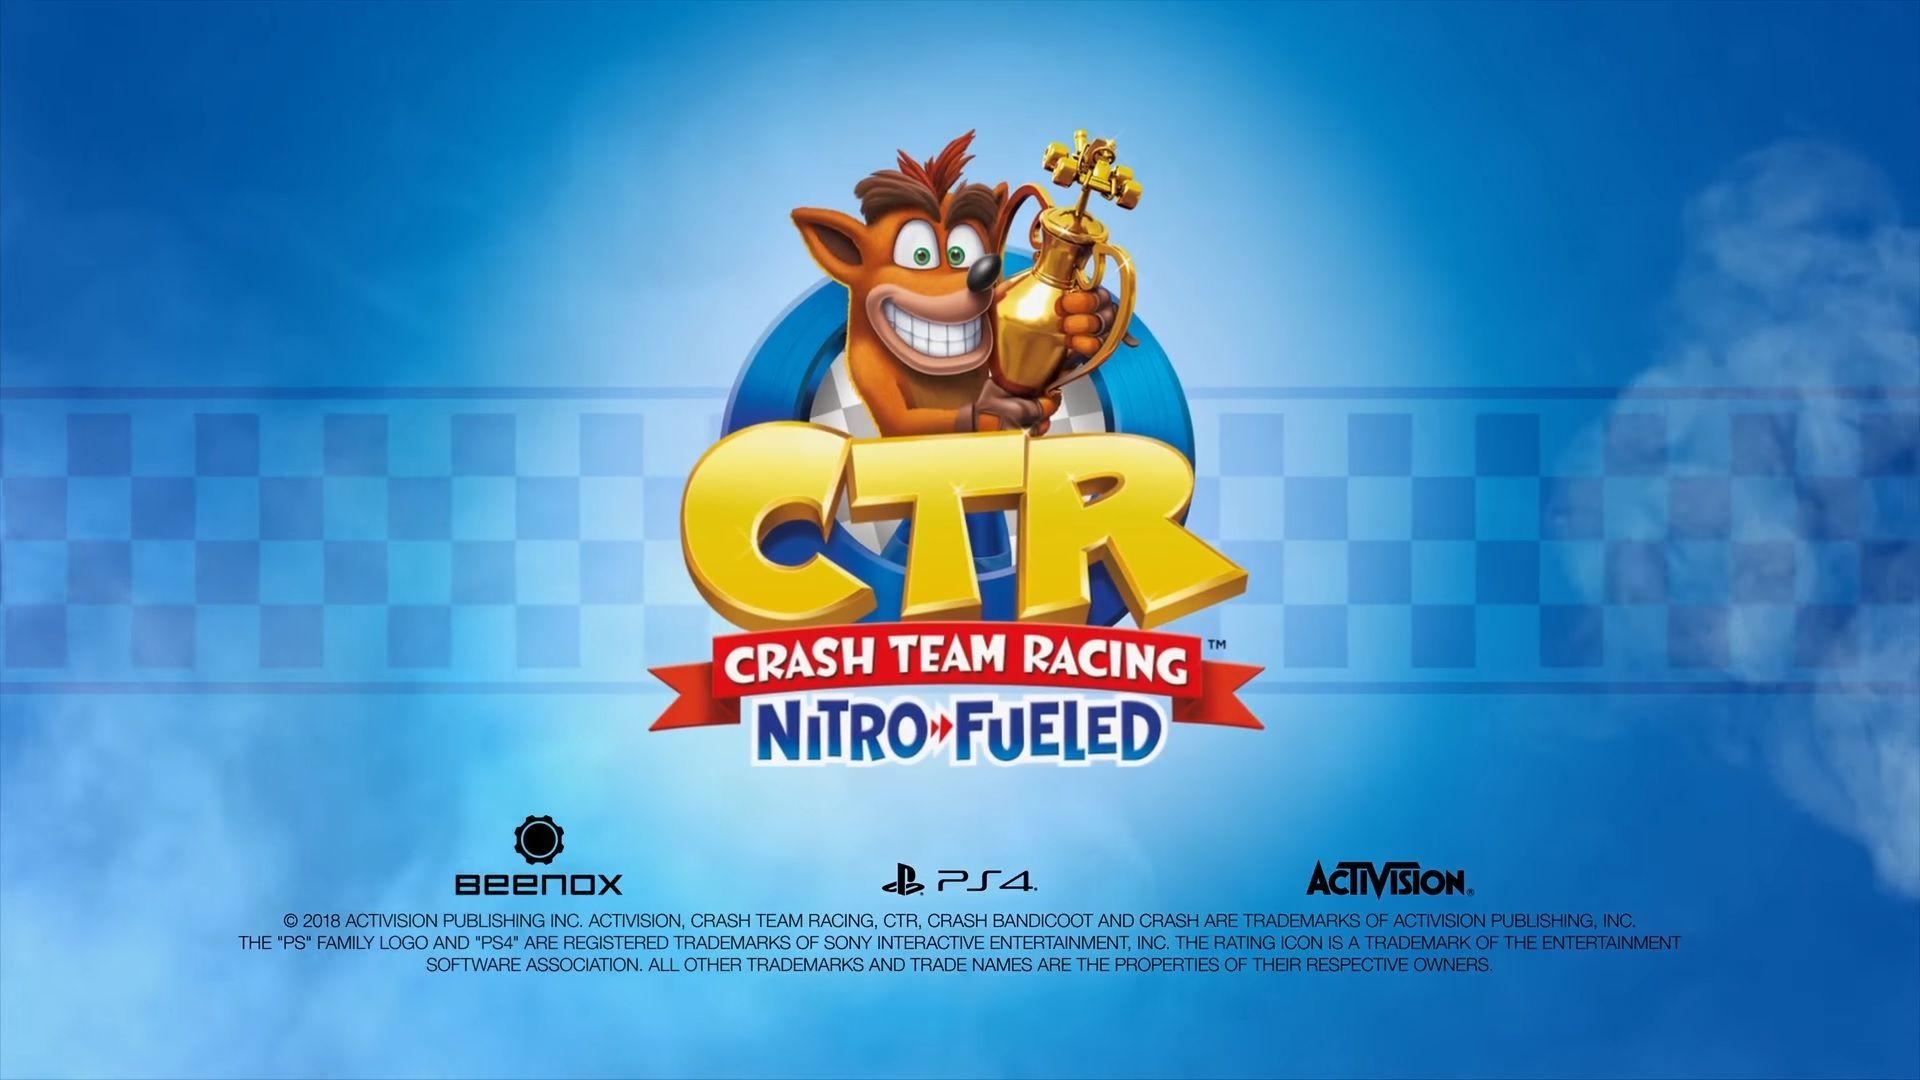 Crash Is Back With Crash Team Racing Nitro Fueled For PS Xbox One